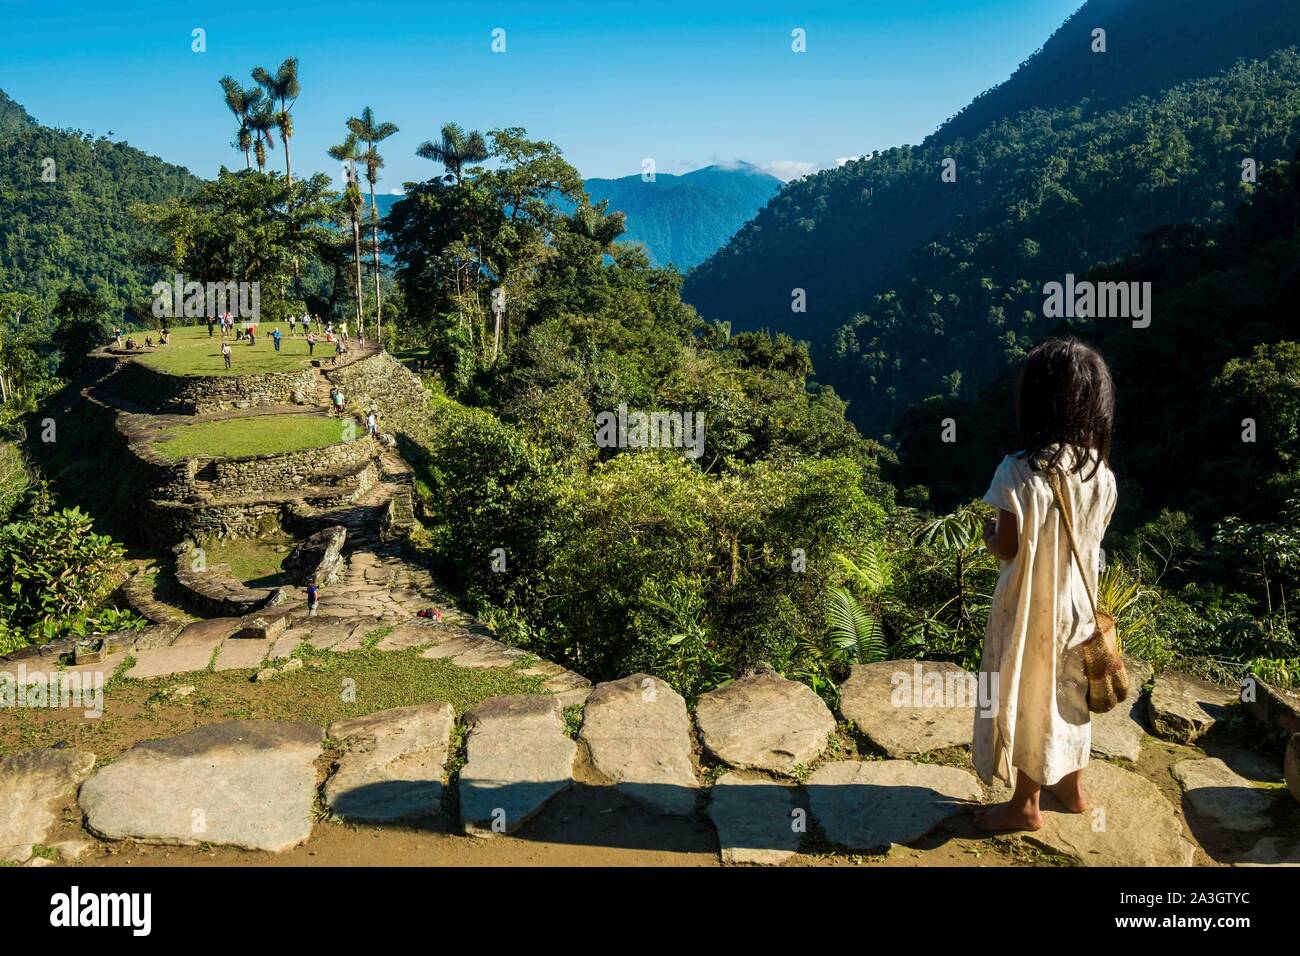 Colombia, Sierra Nevada de Santa Marta, Tayrona Park, trek of the Lost City, registered World Heritage by UNESCO, kogi child contemplating the first groupes of tourists getting to the site Stock Photo